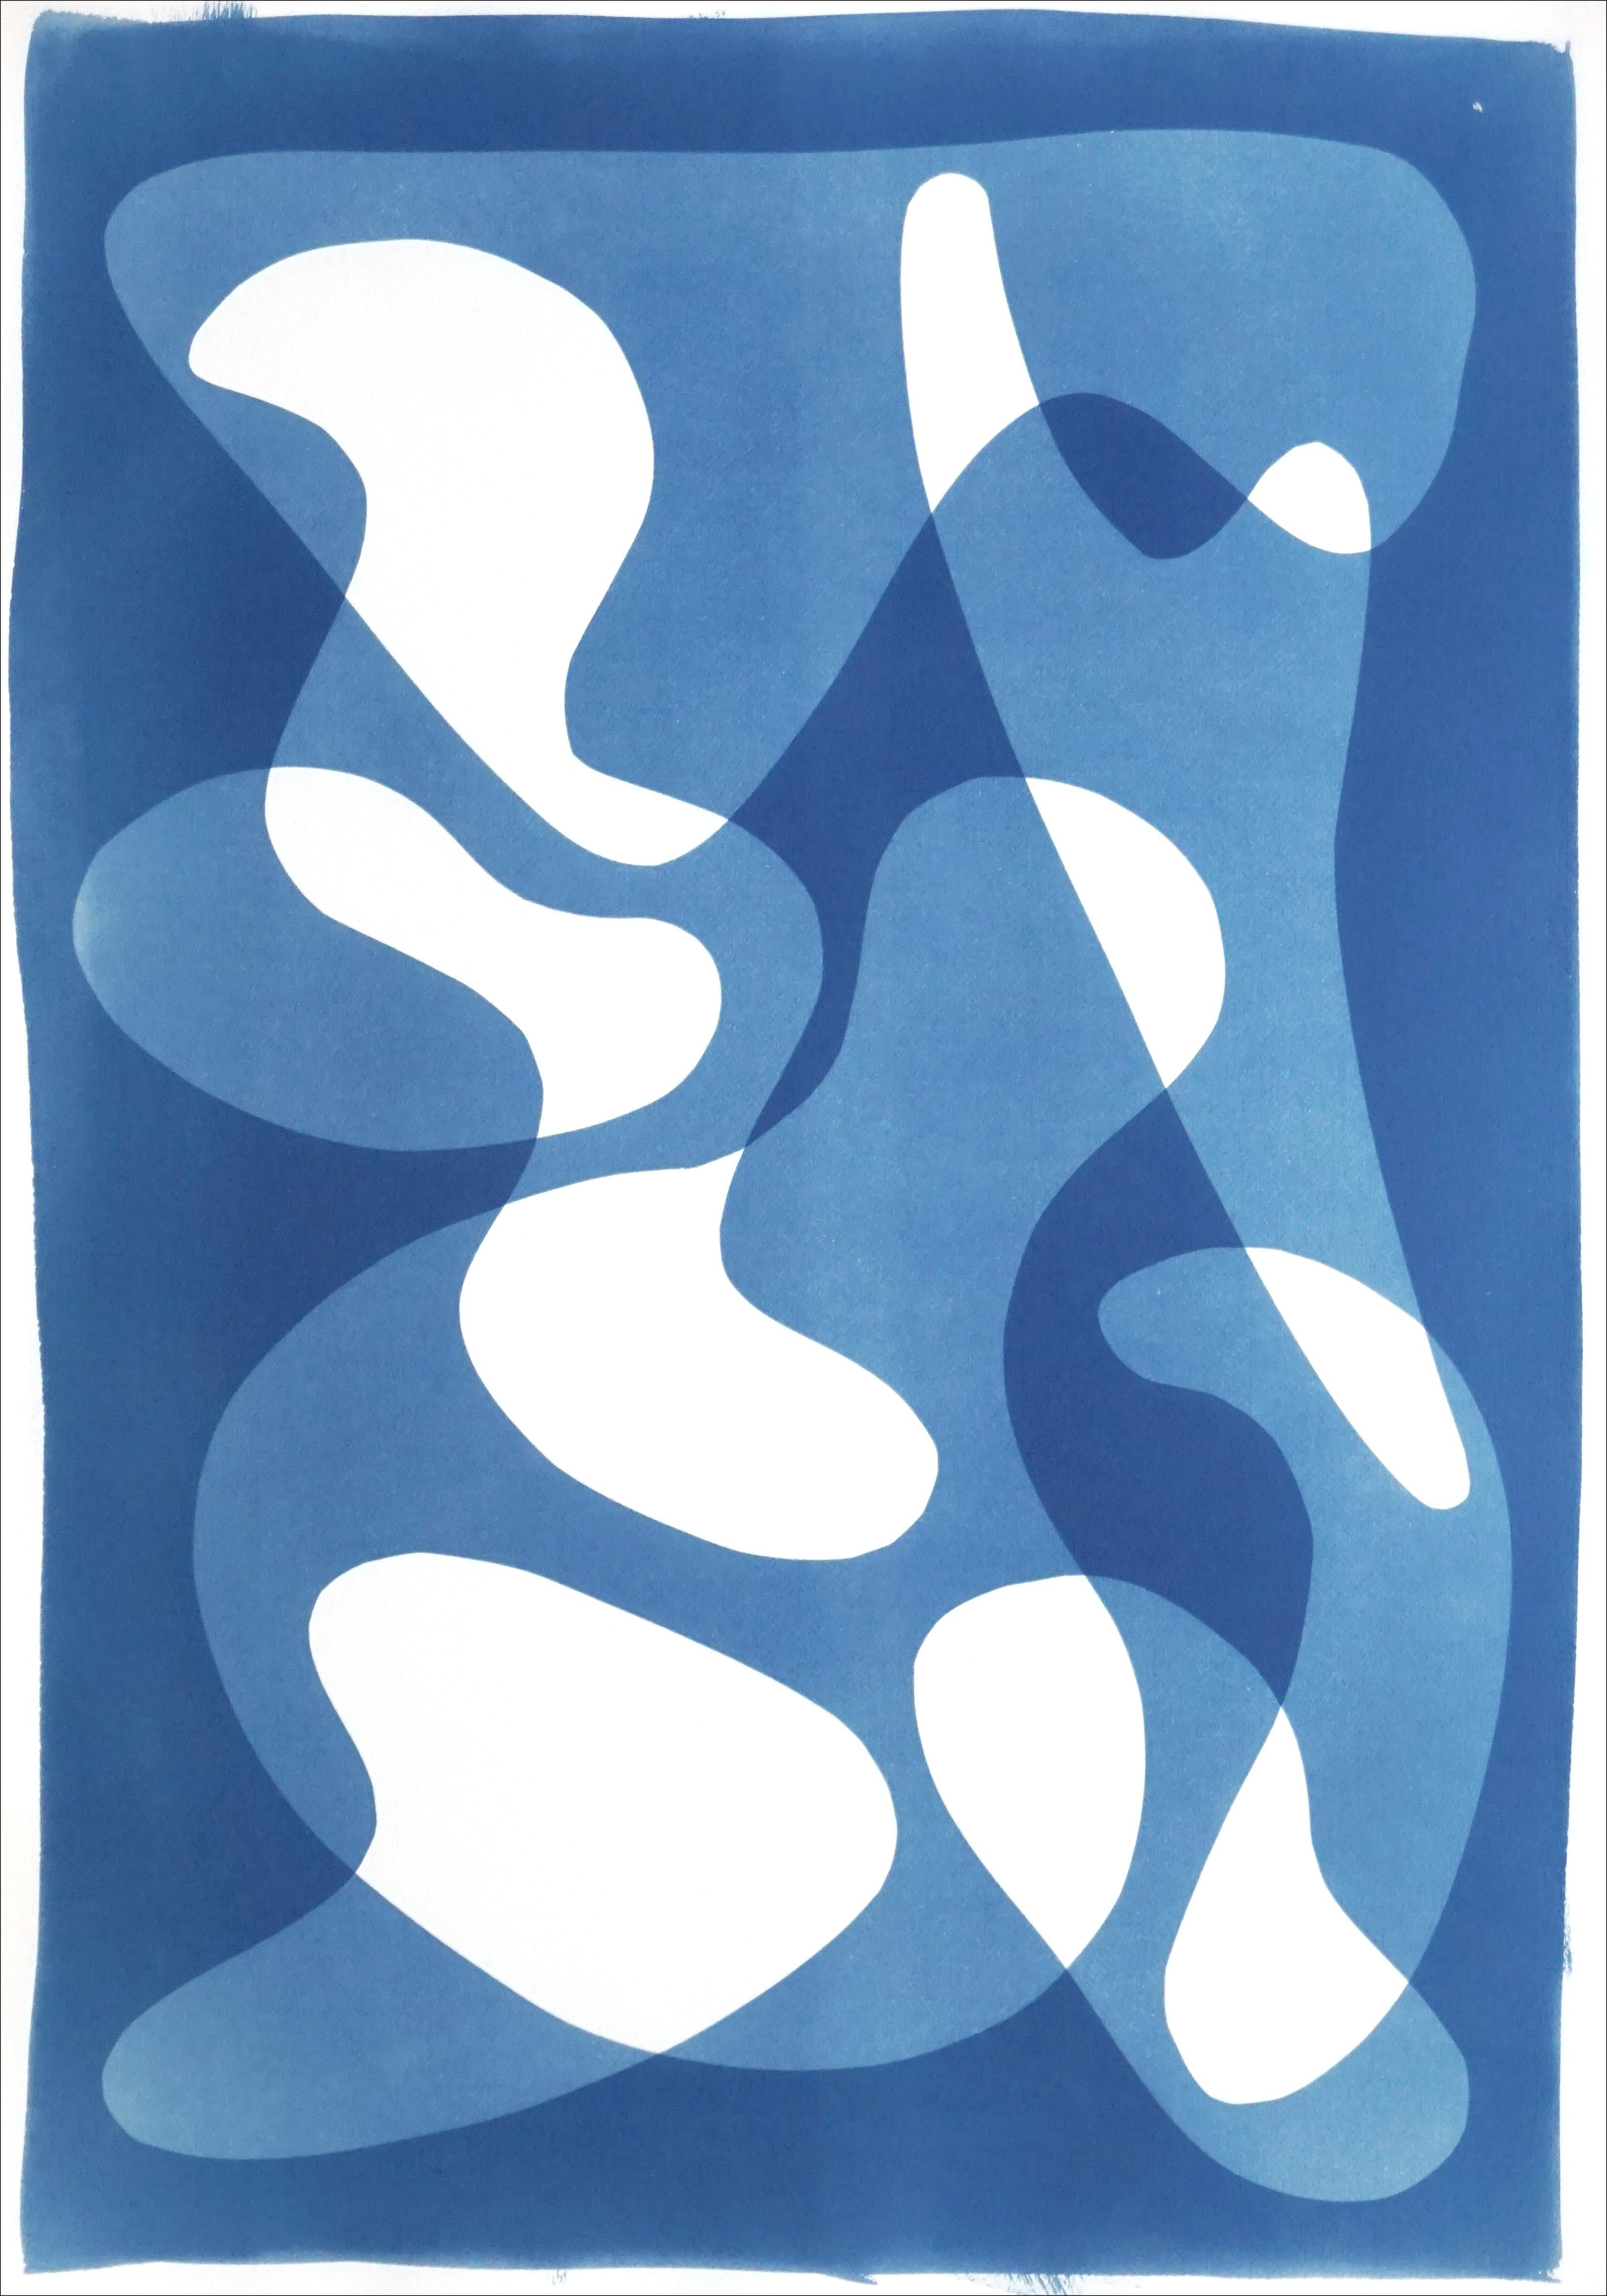 Kind of Cyan Abstract Print - Modern Musical Shapes, Memphis Style Unique Monotype Cyanotype in Blue Tones